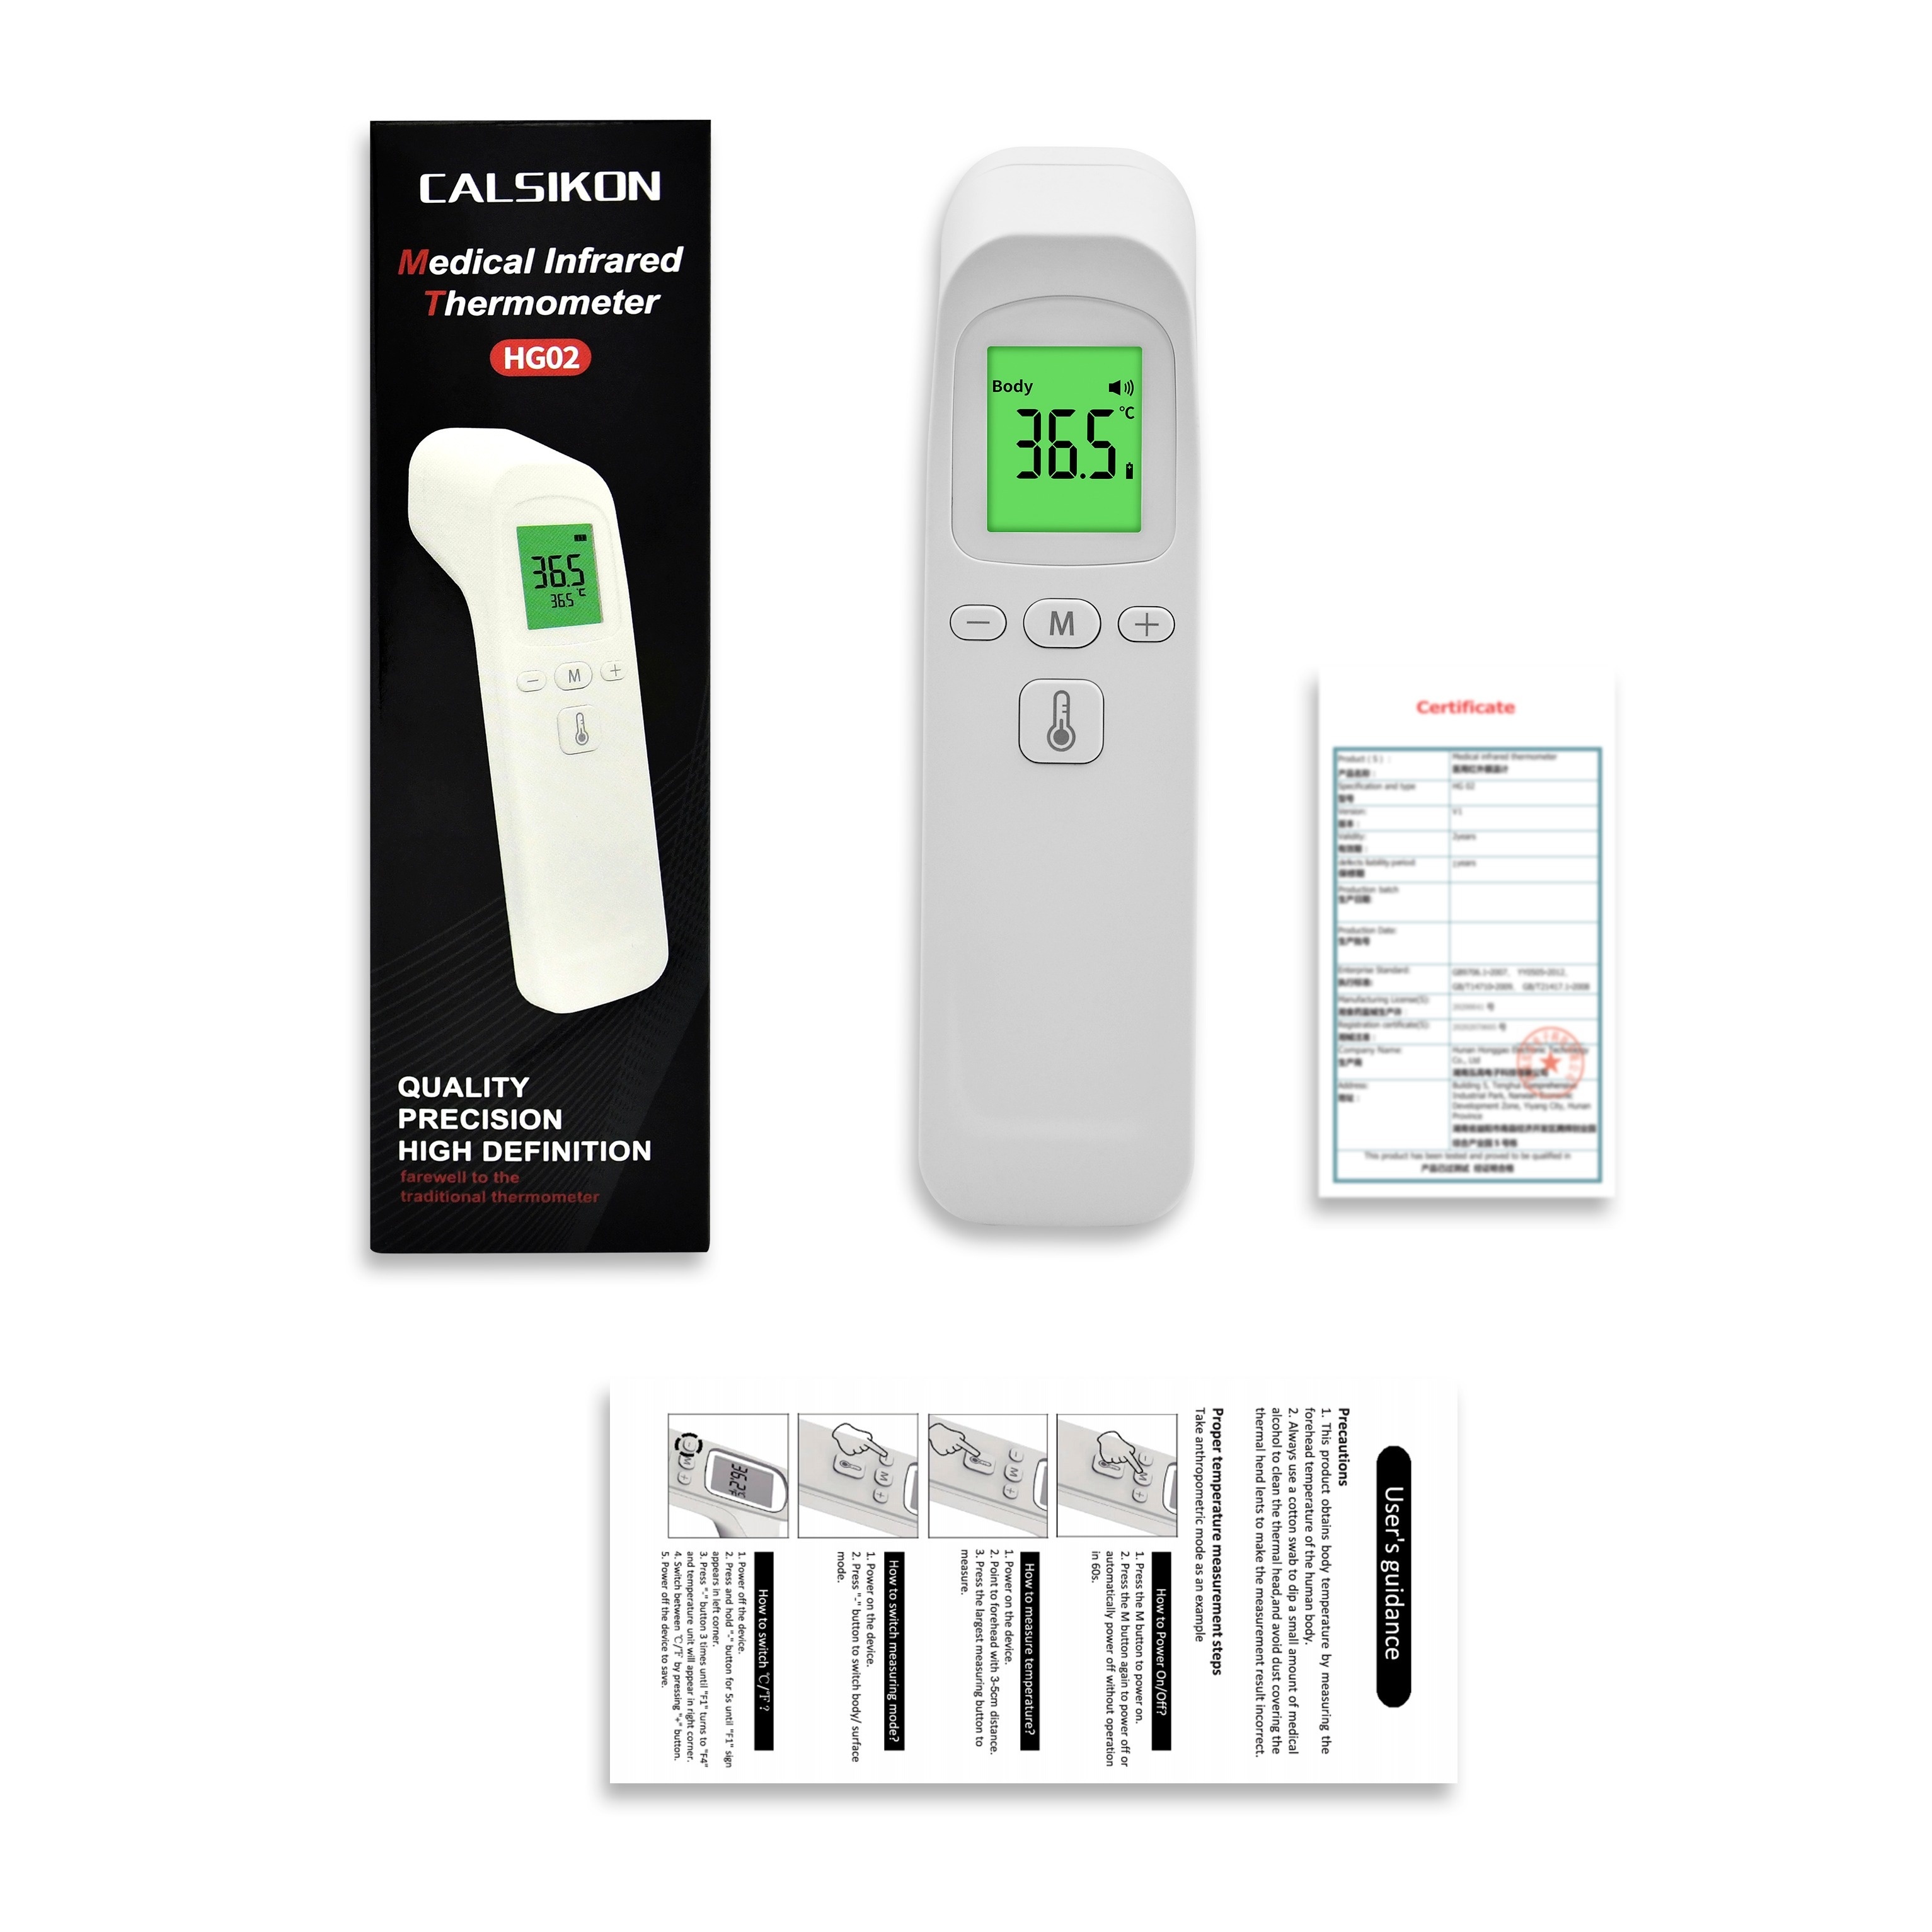 Thermometer SUNPHOR Infrared Forehead Thermometer for Adult and